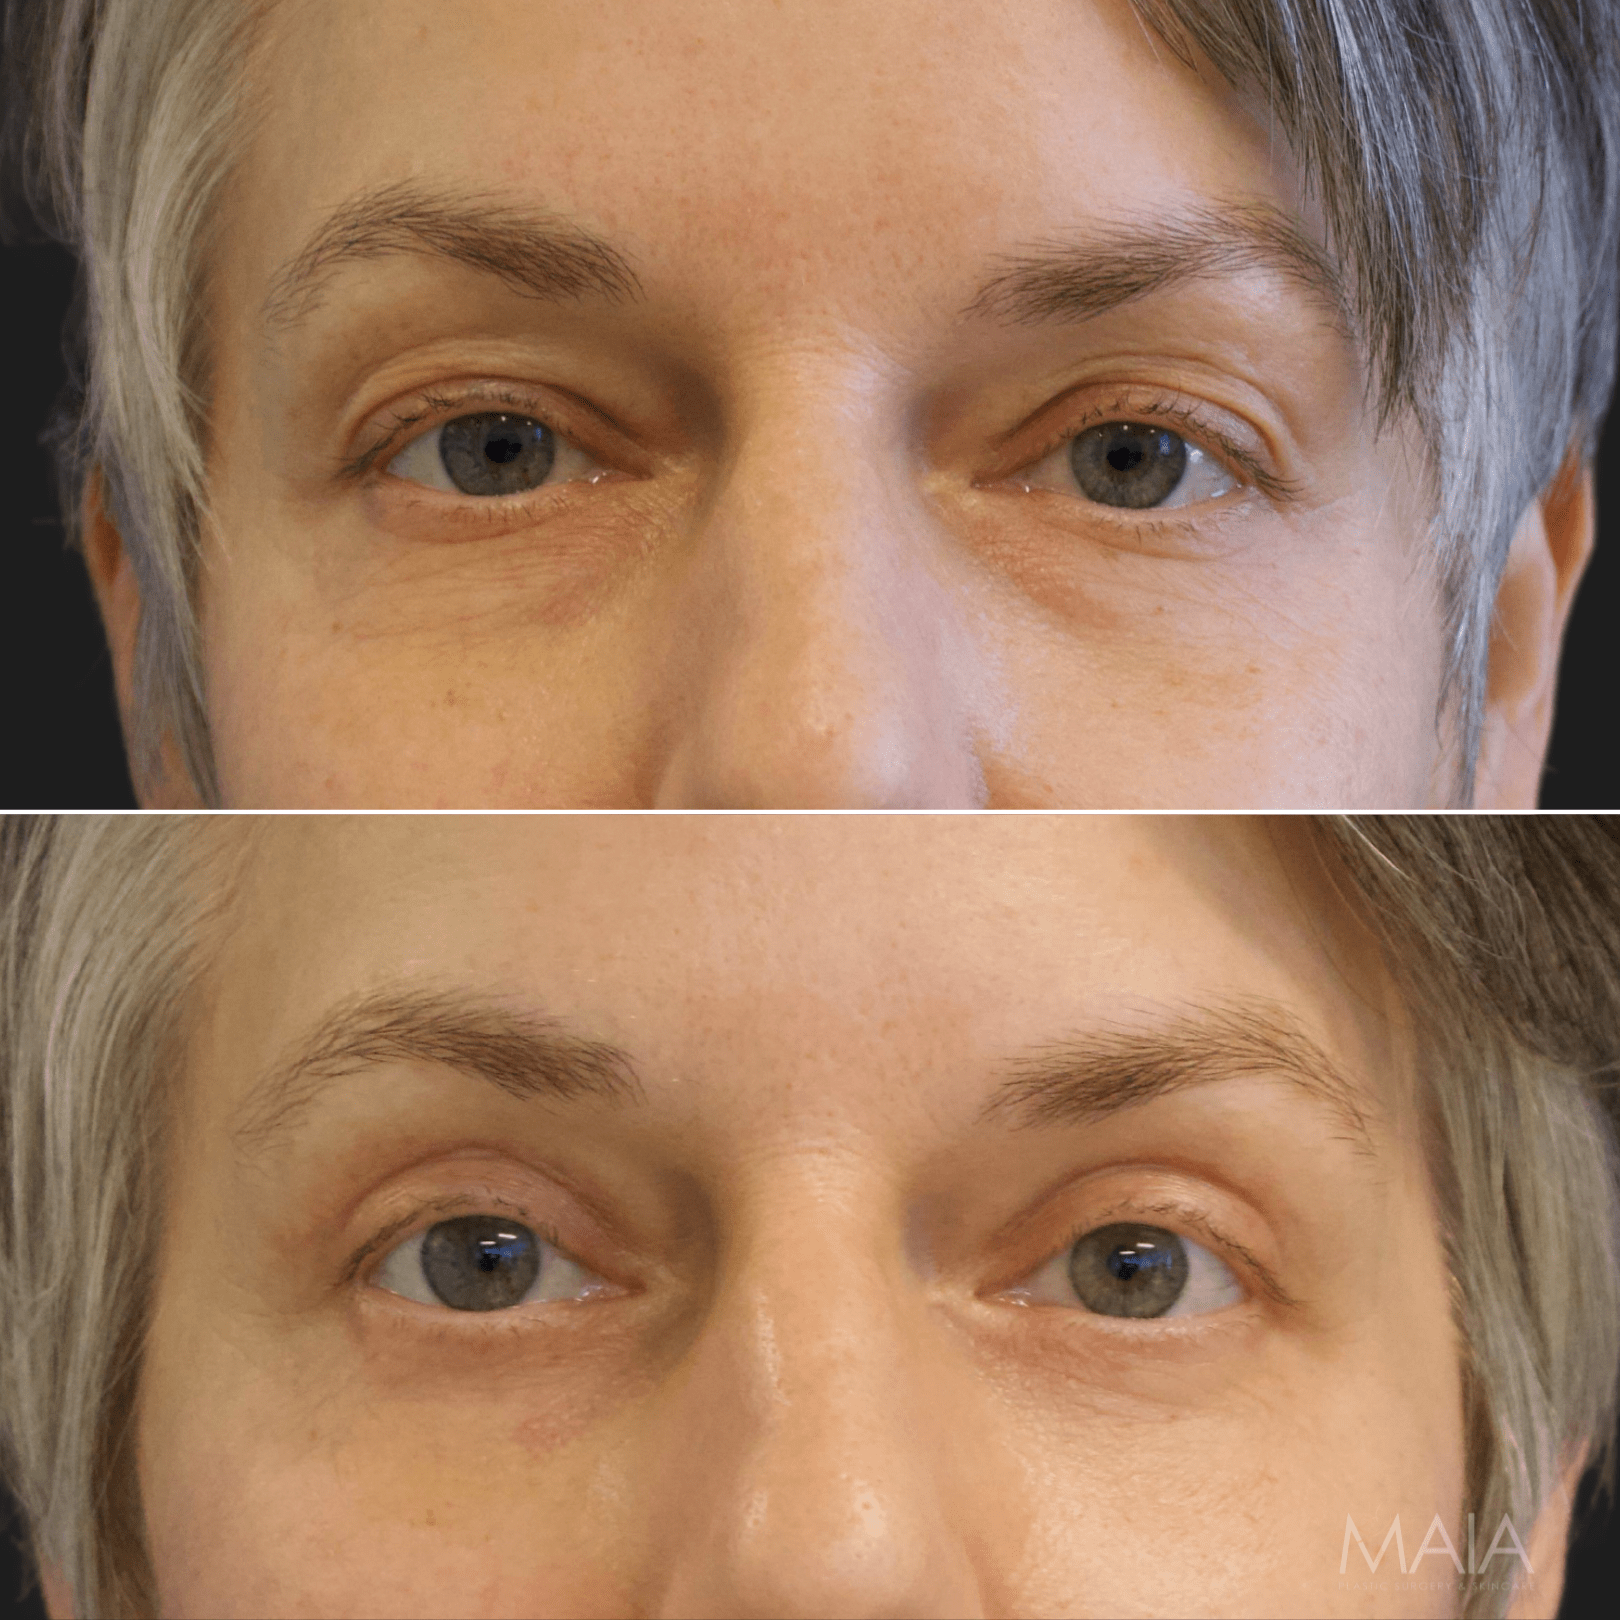 50 year-old before and 3 months after facial rejuvenation surgery: a facelift, neck lift, upper and lower blepharoplasty, and fat grafting to the face